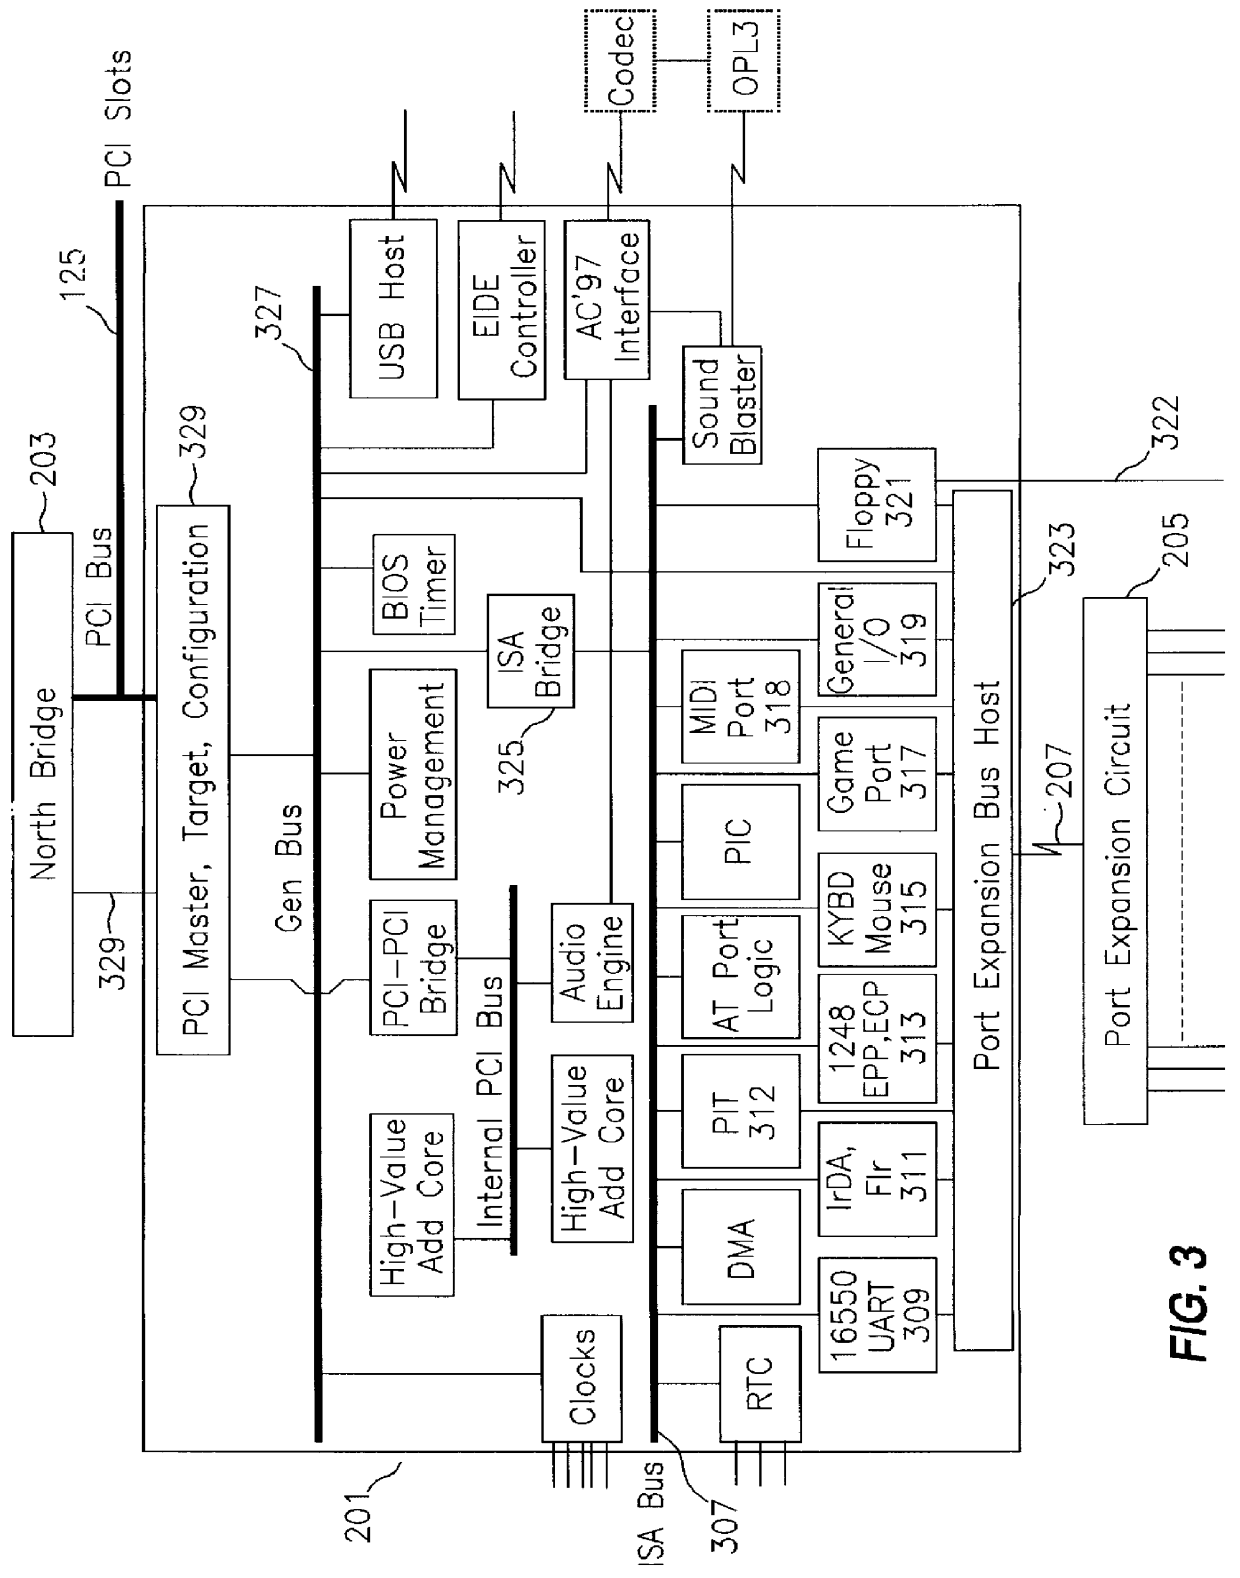 System for partitioning PC chipset functions into logic and port integrated circuits